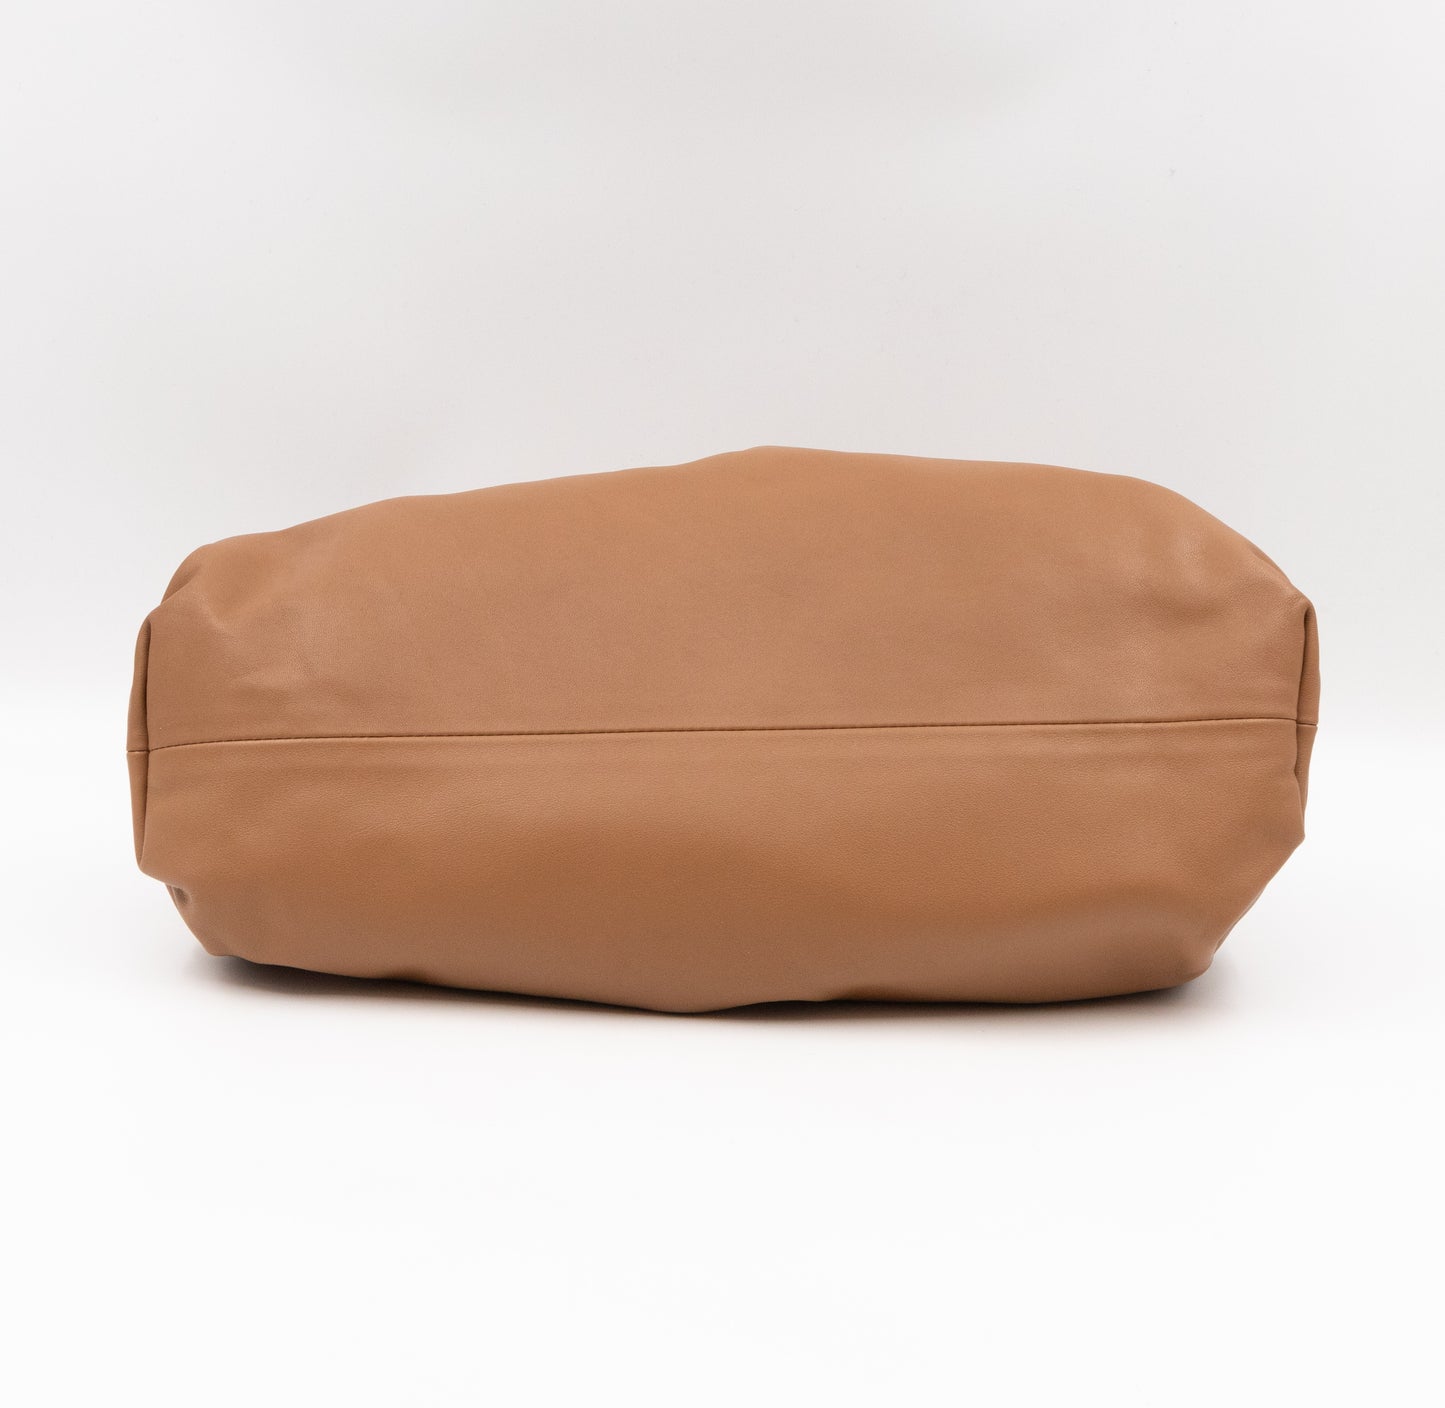 The Pouch Smooth Leather Camello